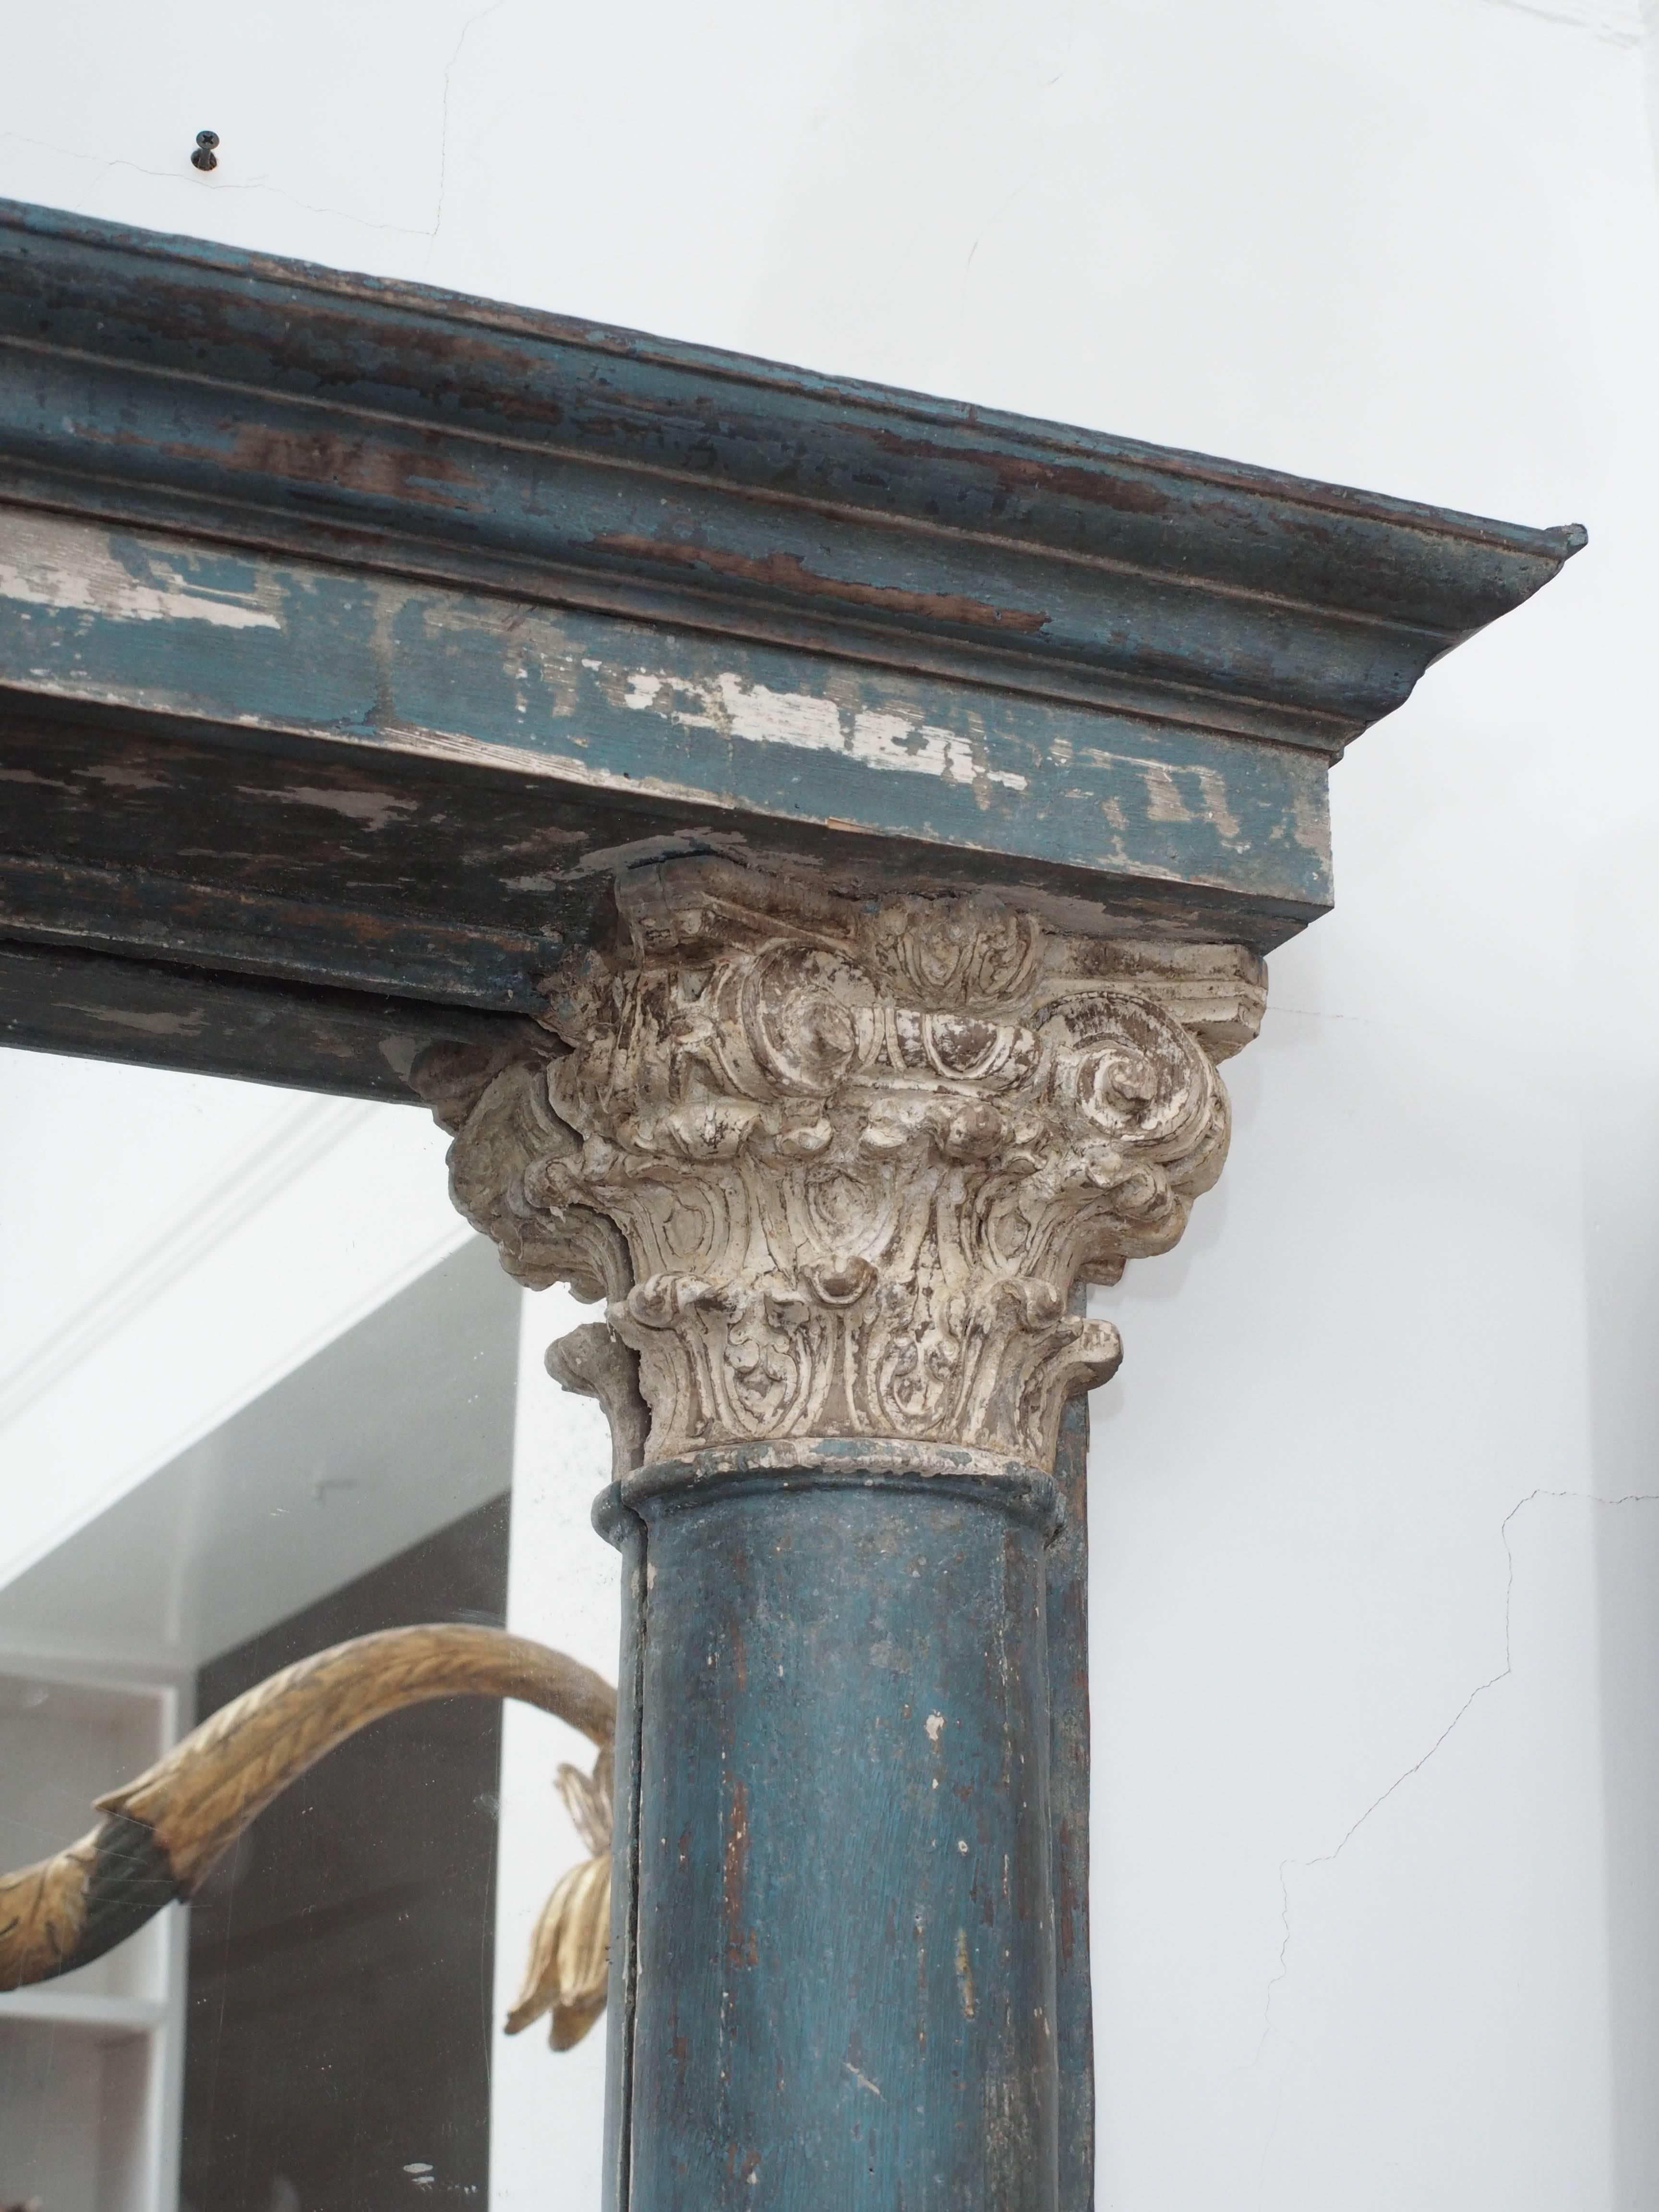 18th century carved wood column mirrors with Corinthian capitals from Portugal.